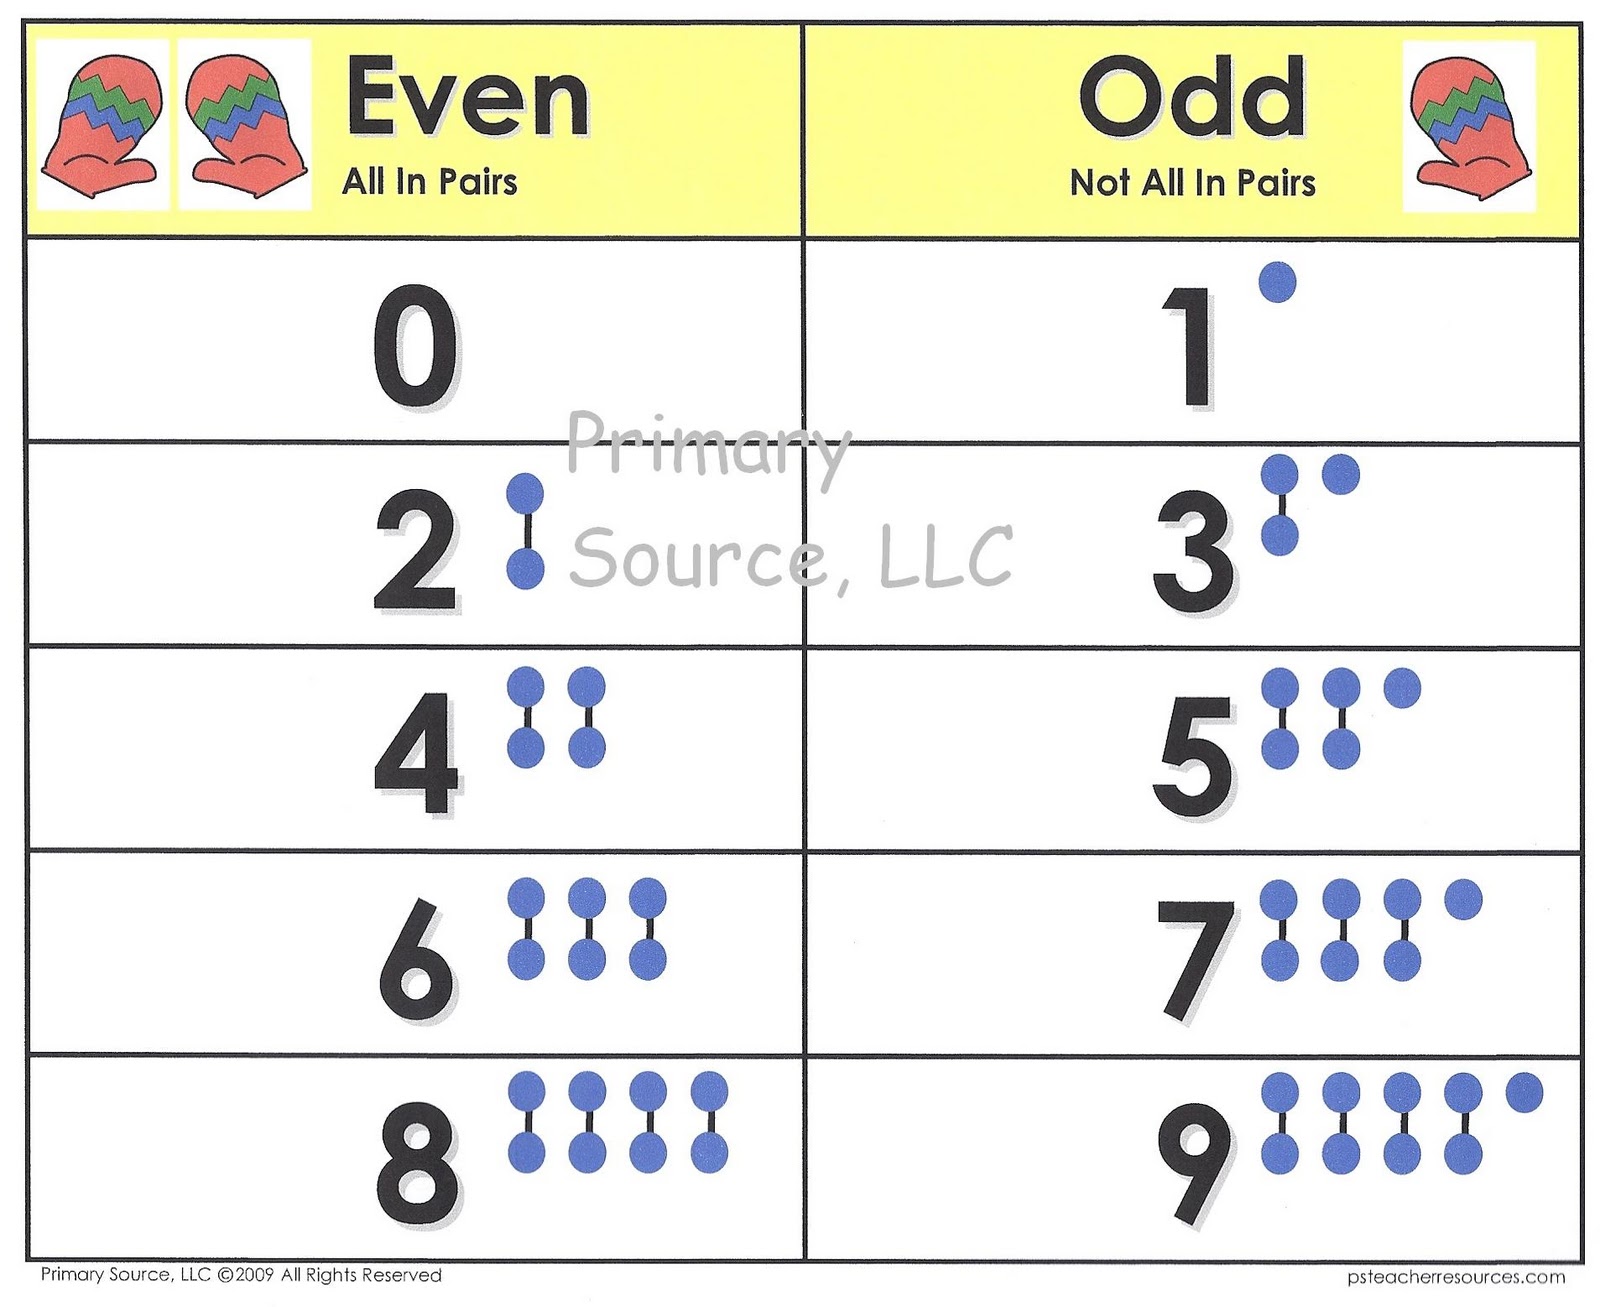 Odd Number Chart